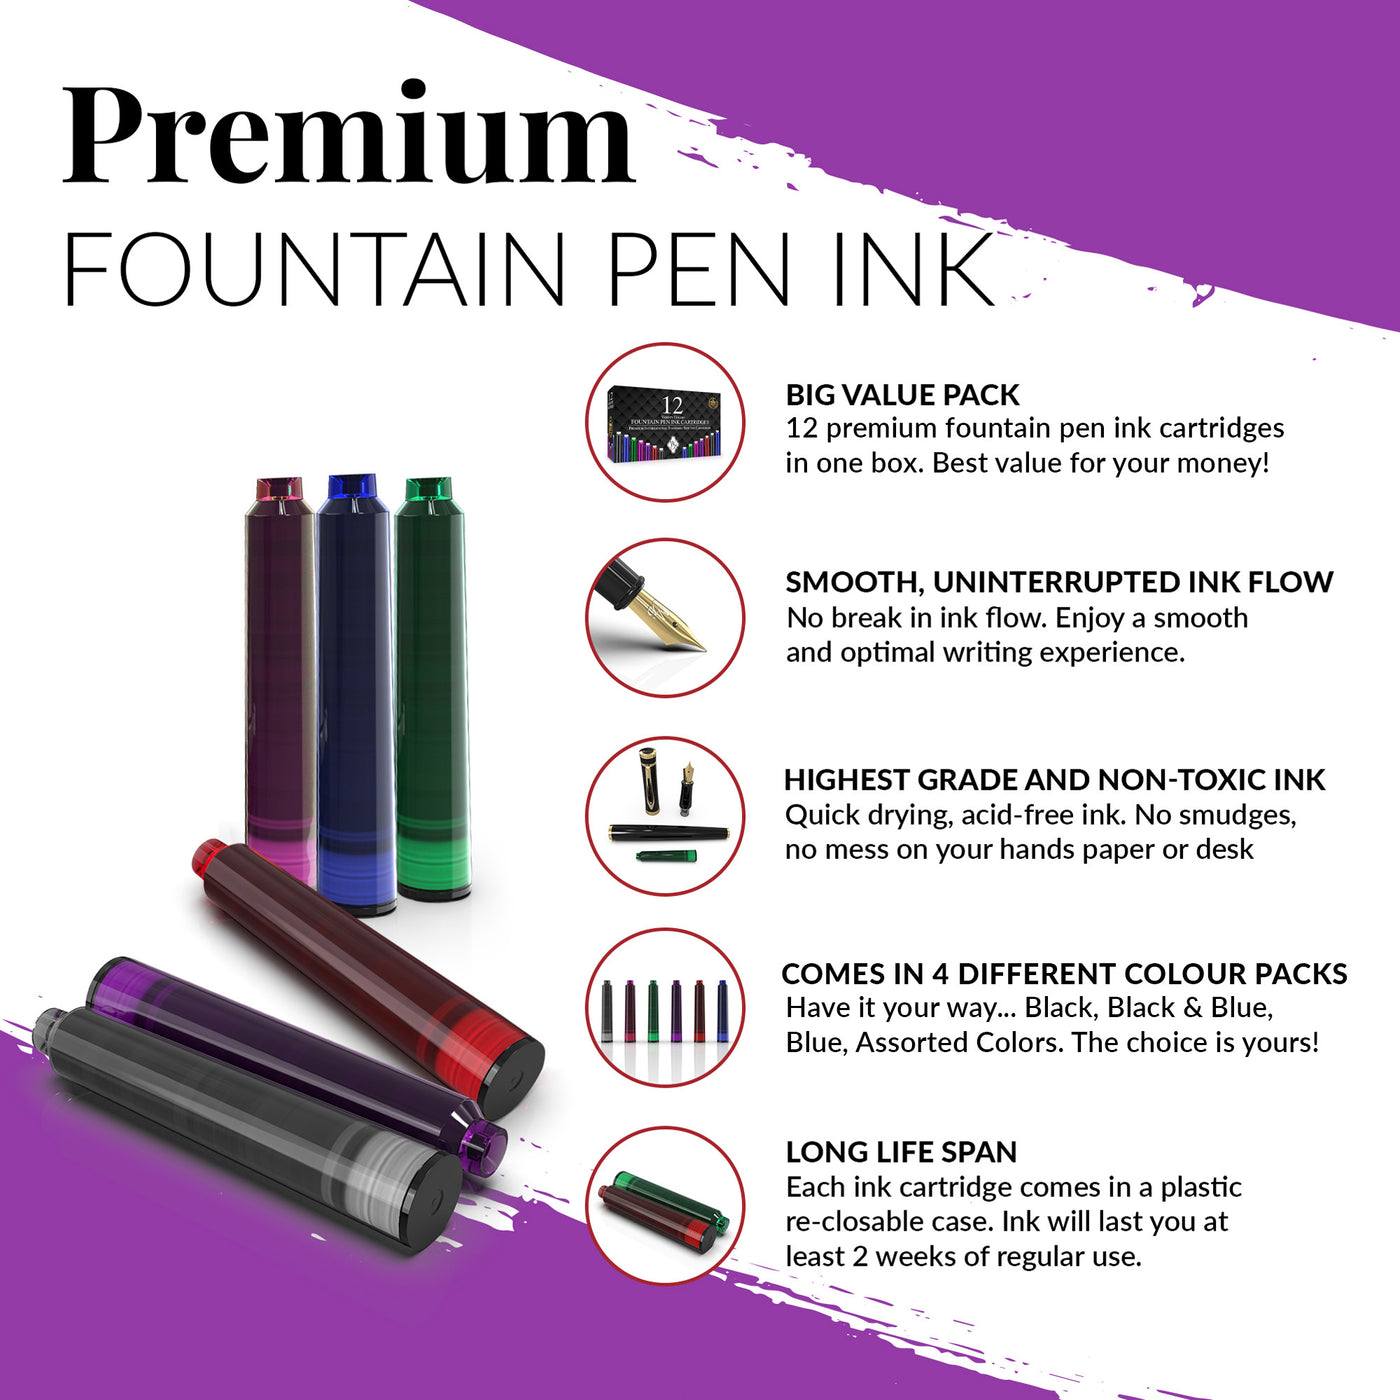 Fountain Pen Ink Refills - 12 Ink Cartridges - International Standard Size - Length APPR 2.04 Inch - Base Diameter APPR 0.24 Inch - Disposable and Generic